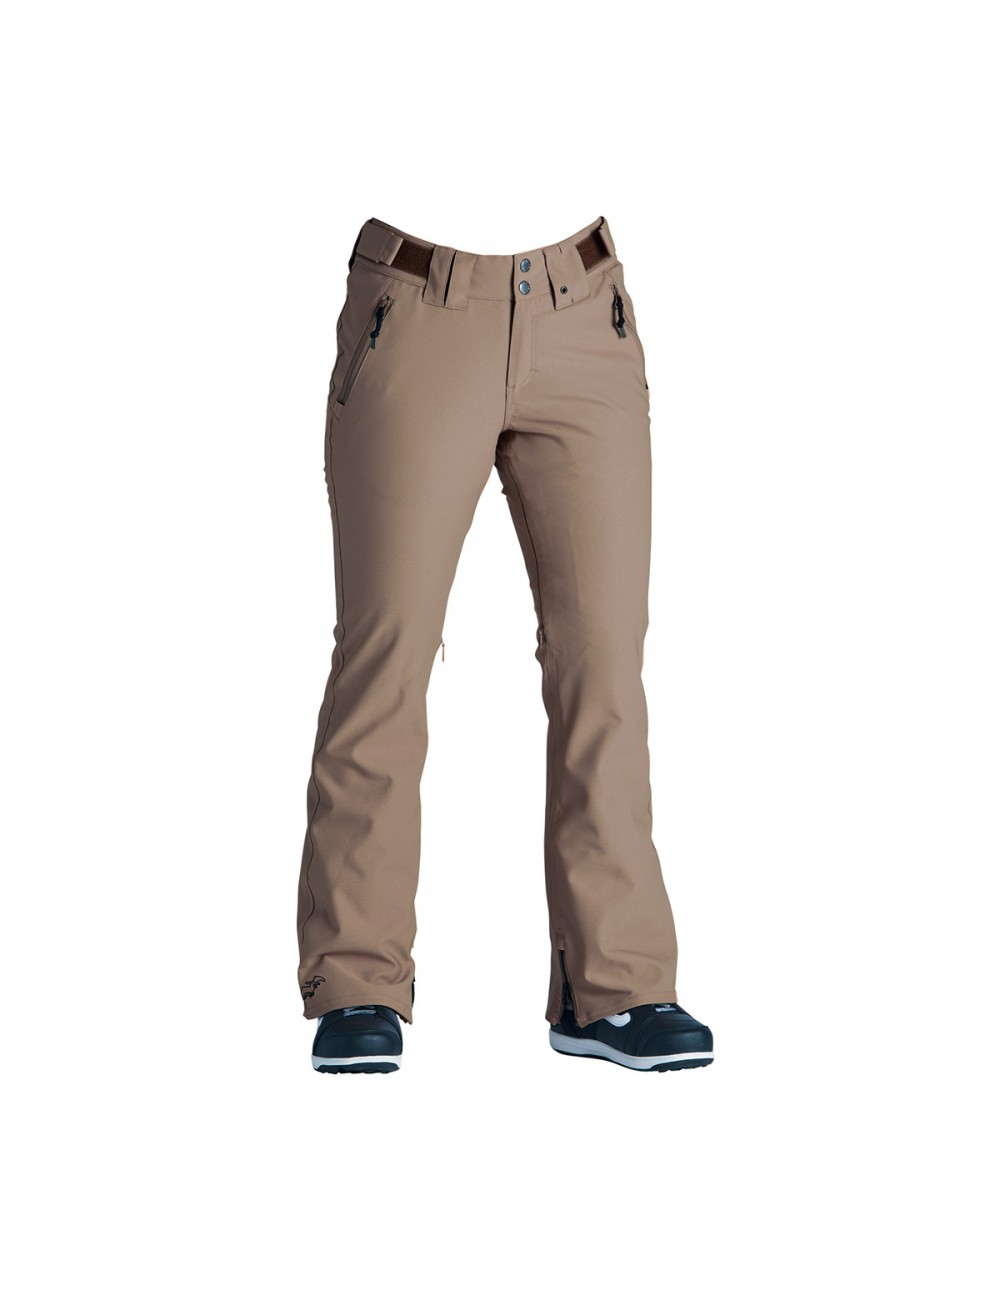 Airblaster Stretch Curve Pant - Puddle